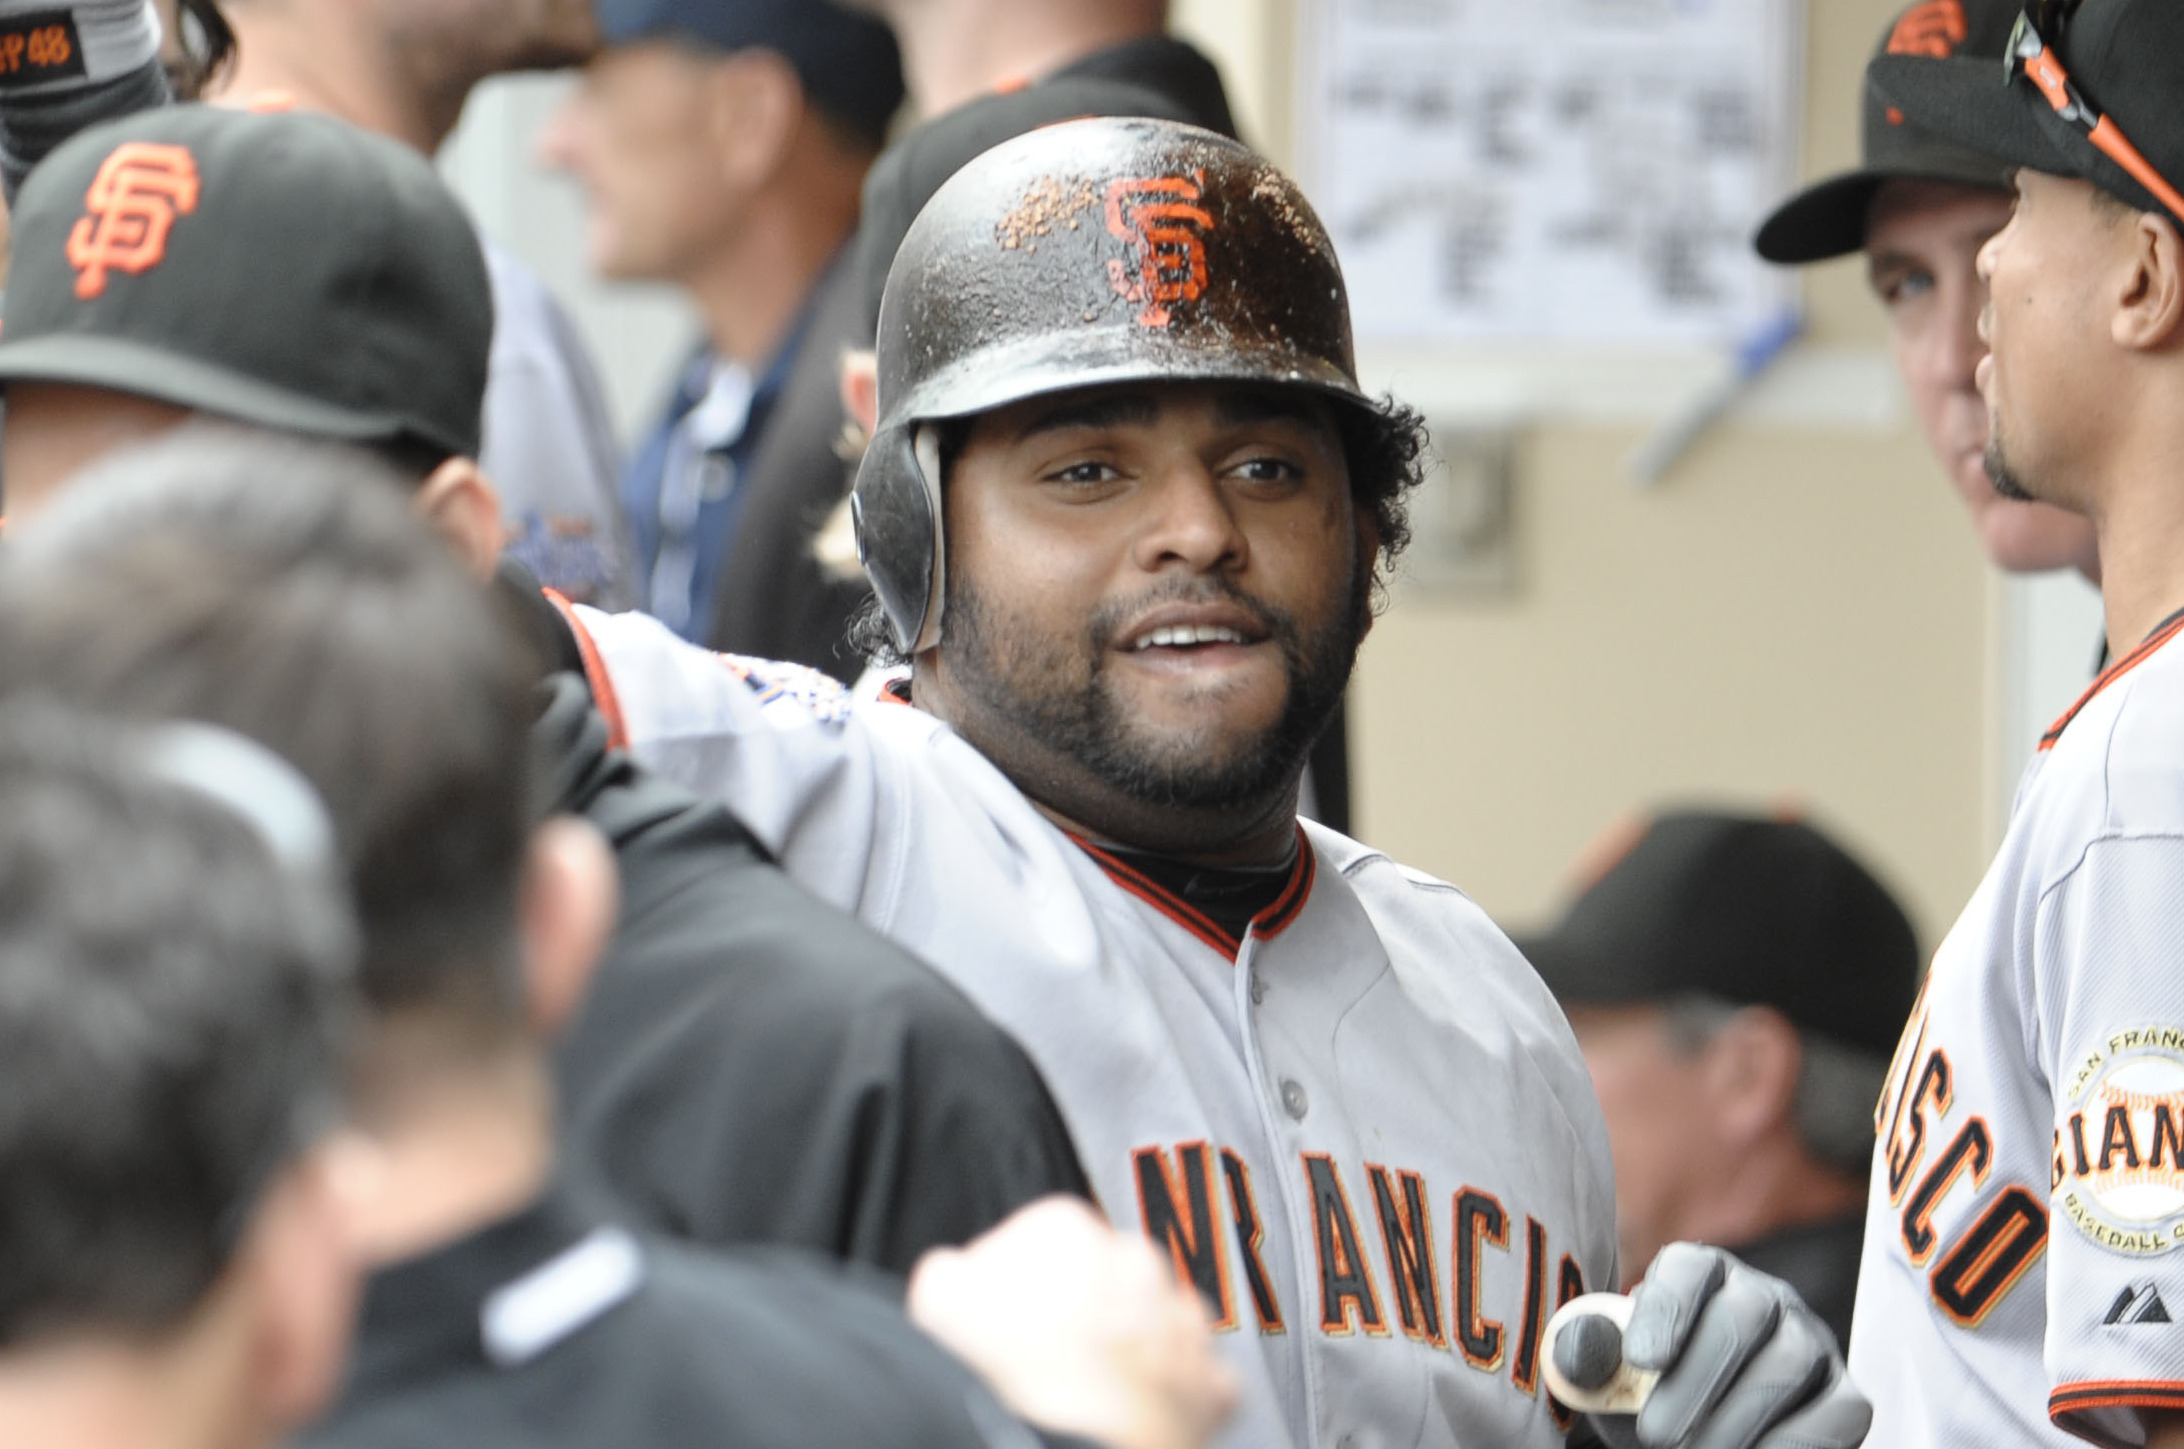 Pablo Sandoval removes his jersey as he enters the clubhouse after